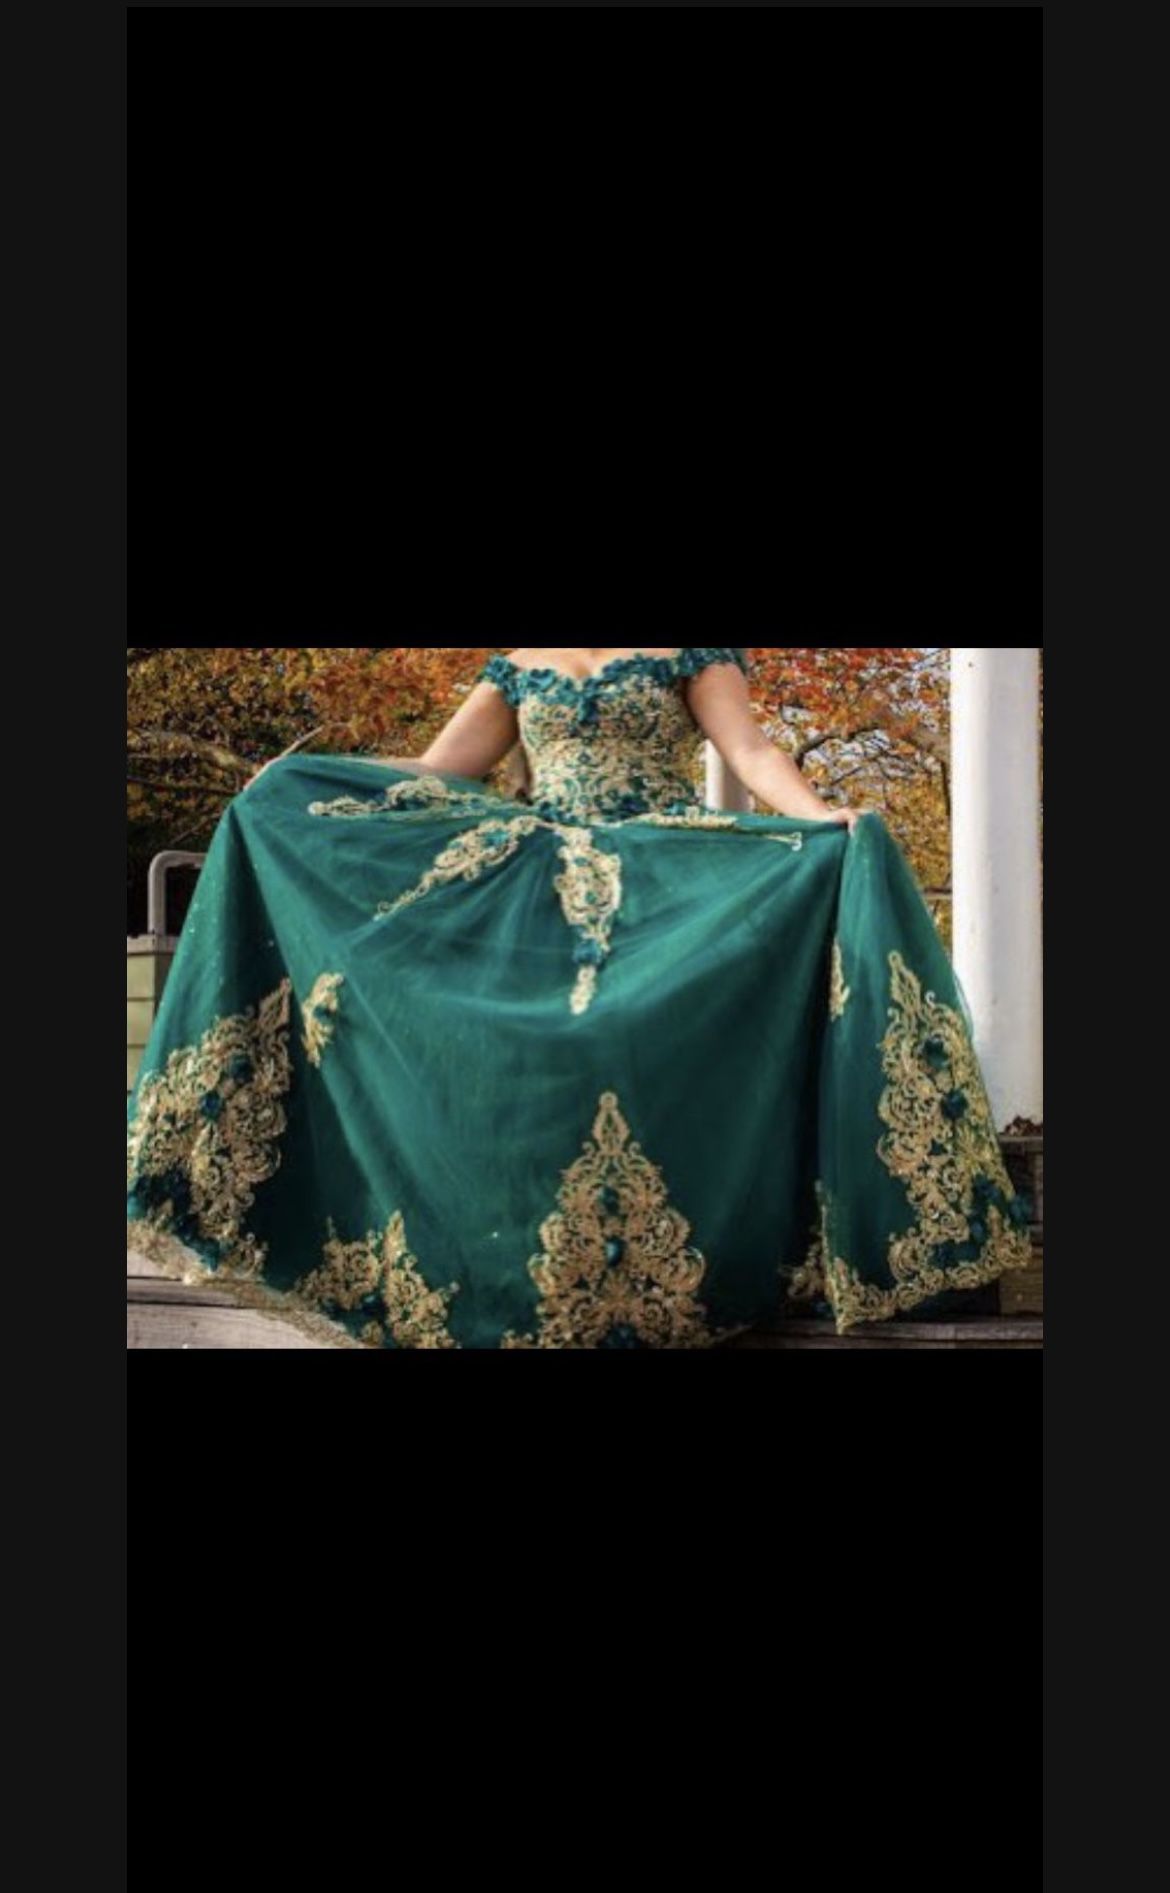 PROM Dress, Sweet 16, Quinceañera, bridesmaid, open back, sparkly, shimmery, sequin, sexy, beautiful, dazzling, long princess dress.  Colors: Emerald 